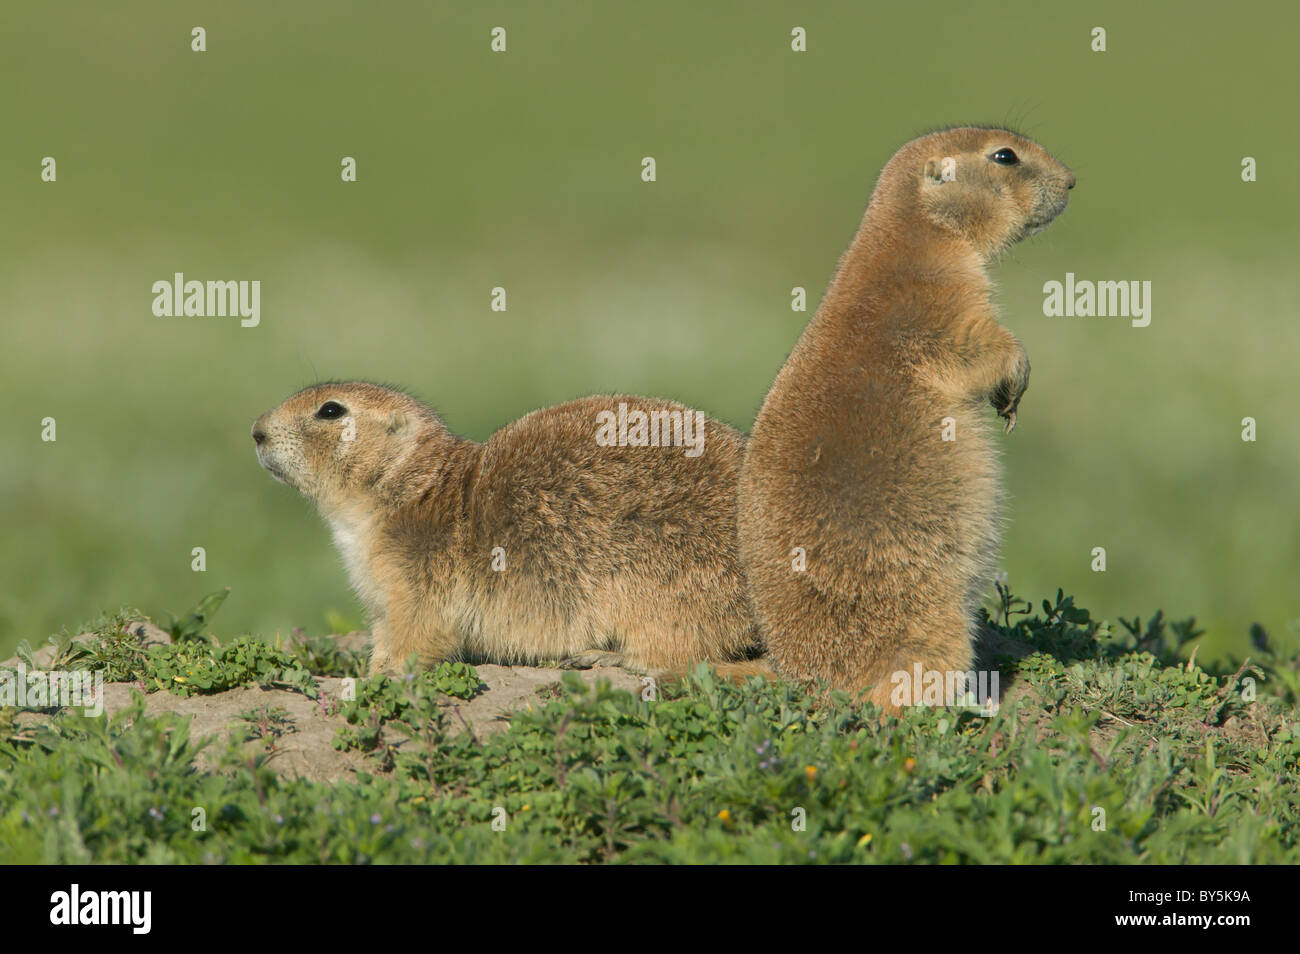 Two Black-tailed Prairie Dogs (Cynomys ludovicianus) outside their burrow. Stock Photo